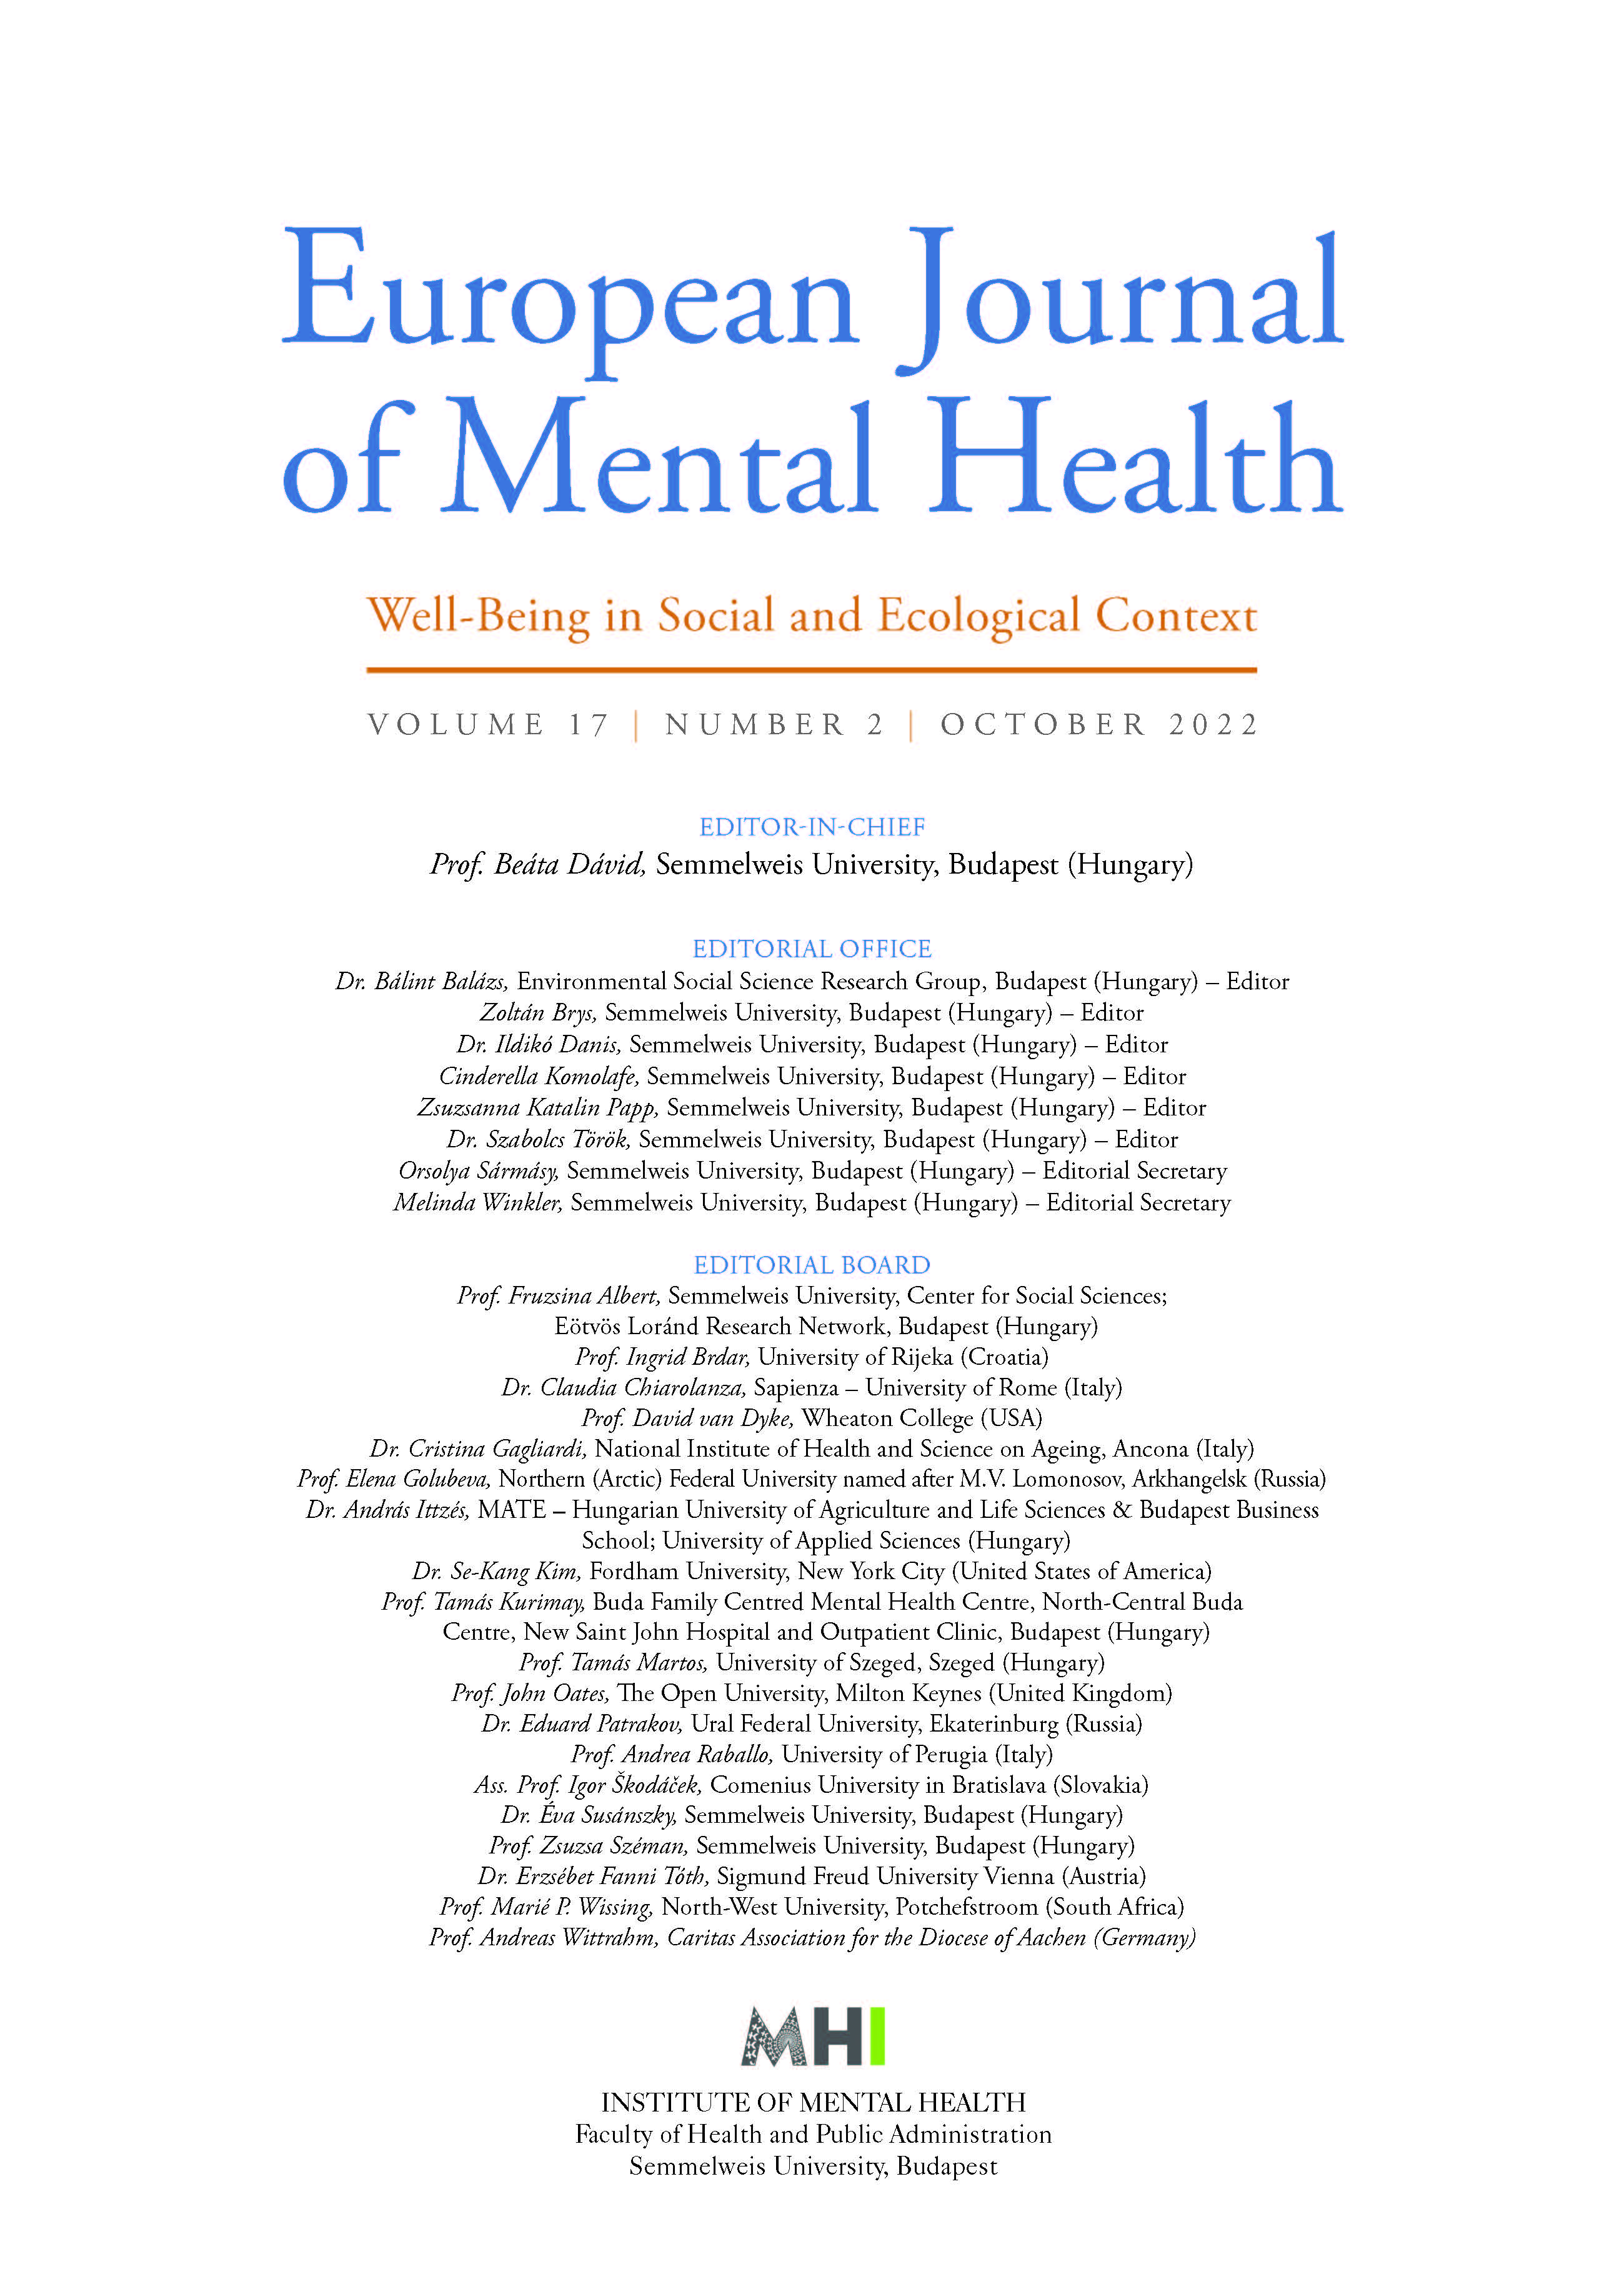 The Multifactorial Background of Helping Professionals’ Vital Exhaustion and Subjective Well-Being During the First Wave of COVID-19 in Hungary: A Cross-Sectional Study Cover Image